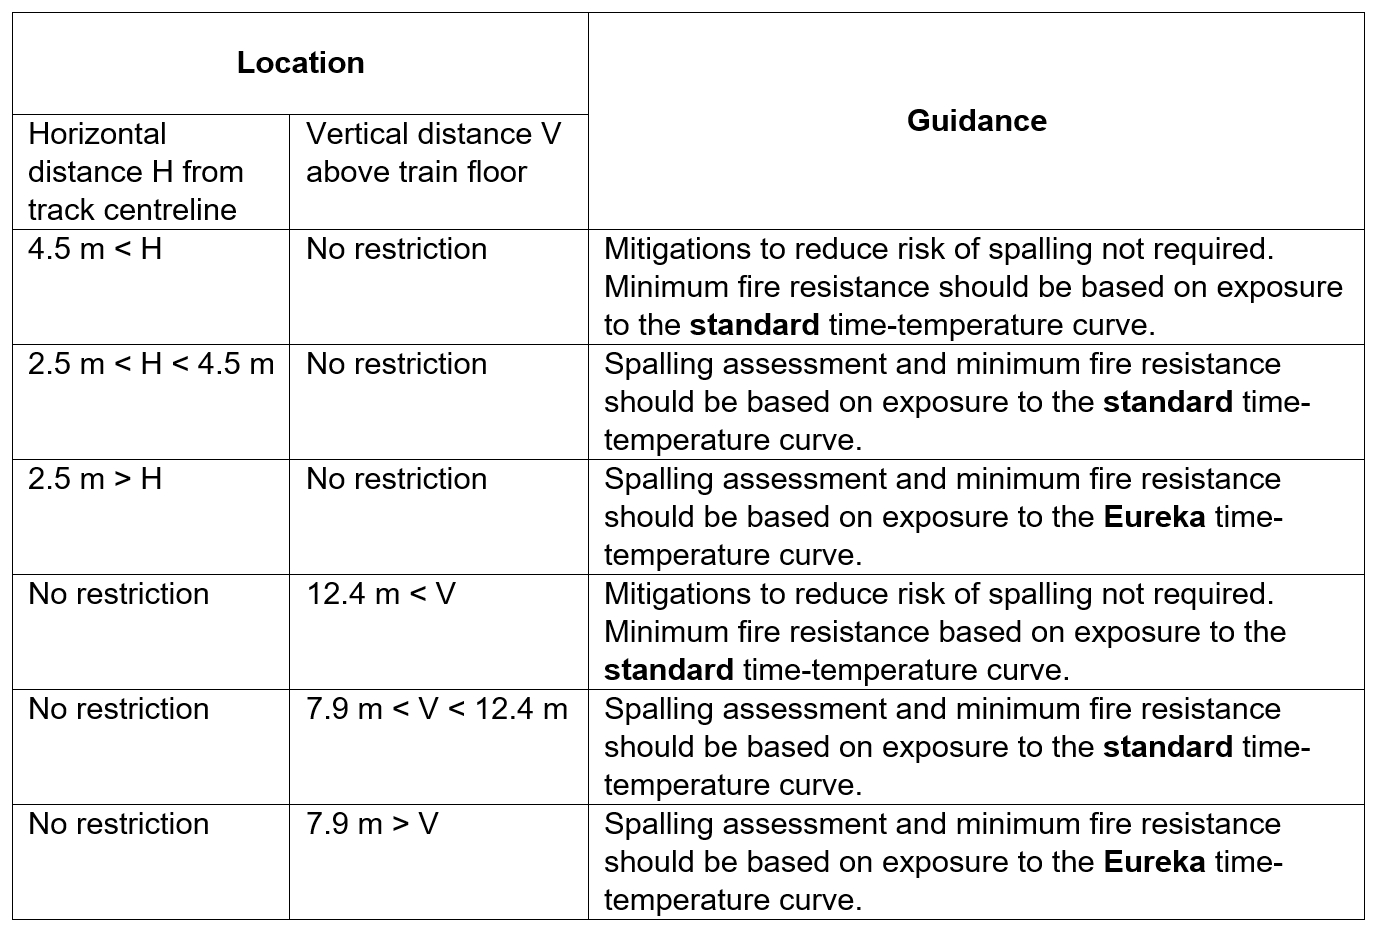 Table showing spalling assessment and minimum fire resistance 